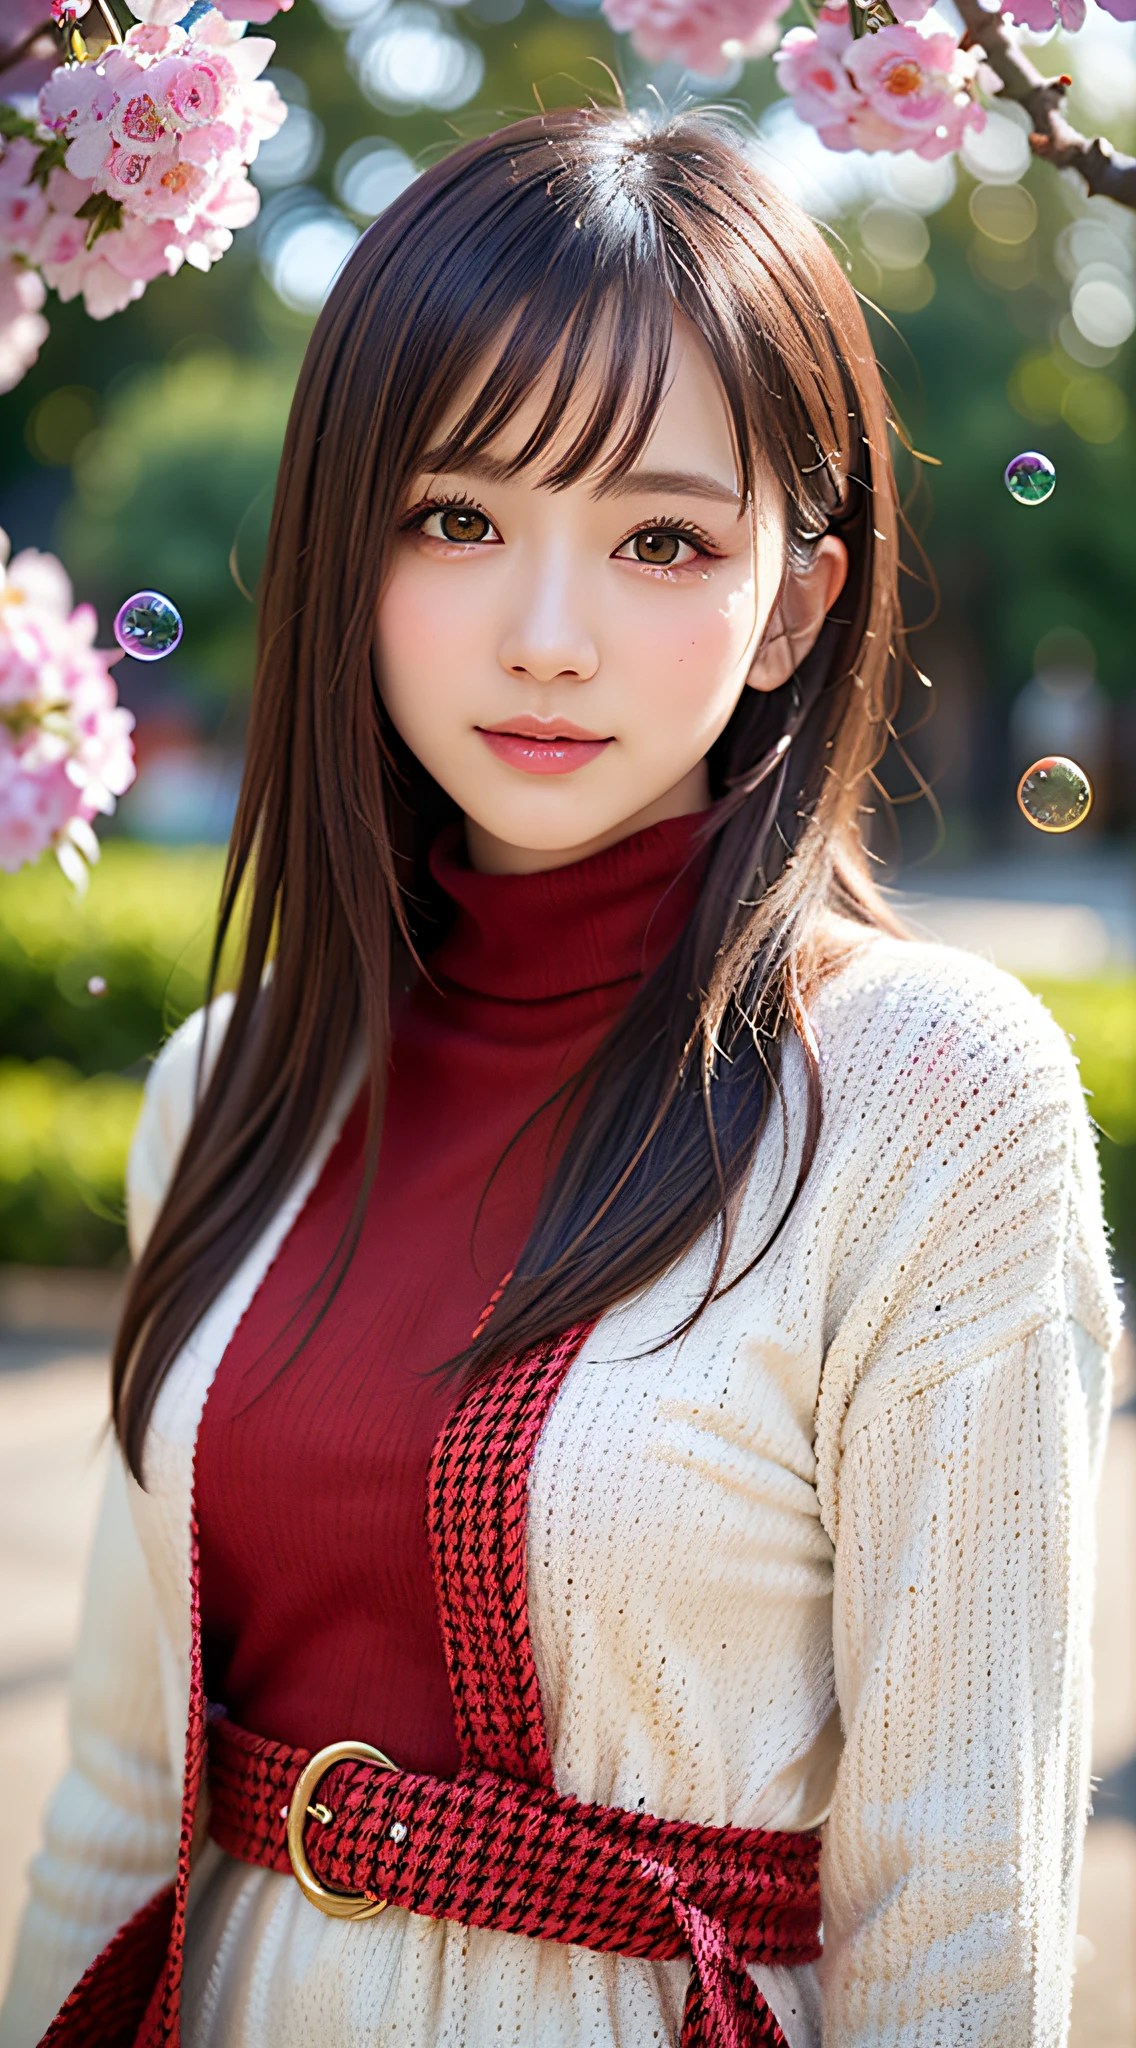 1 beautiful young girl, Super beautiful detailed face, smile shyly, symmetrical black eyes, small breasts), (red houndstooth coat:1.4), (off-white turtleneck sweater dress:1.3), bon cut hair, (Fine face:1.2), High quality, Realistic, extremely detailed CG unified 8k wallpaper, highly detailed, High-definition raw color photos, professional photography, Realistic portrait, Cinematic Light, Beautiful detailed, Super Detail, high details, (((Bokeh))), depth of fields, illumination, Super stylish lighting, Floating, (High saturation), (background, (colorful splash:1.3), (colorful bubbles:1.3), (Shining:1.3), (colorful flowers:1.3))